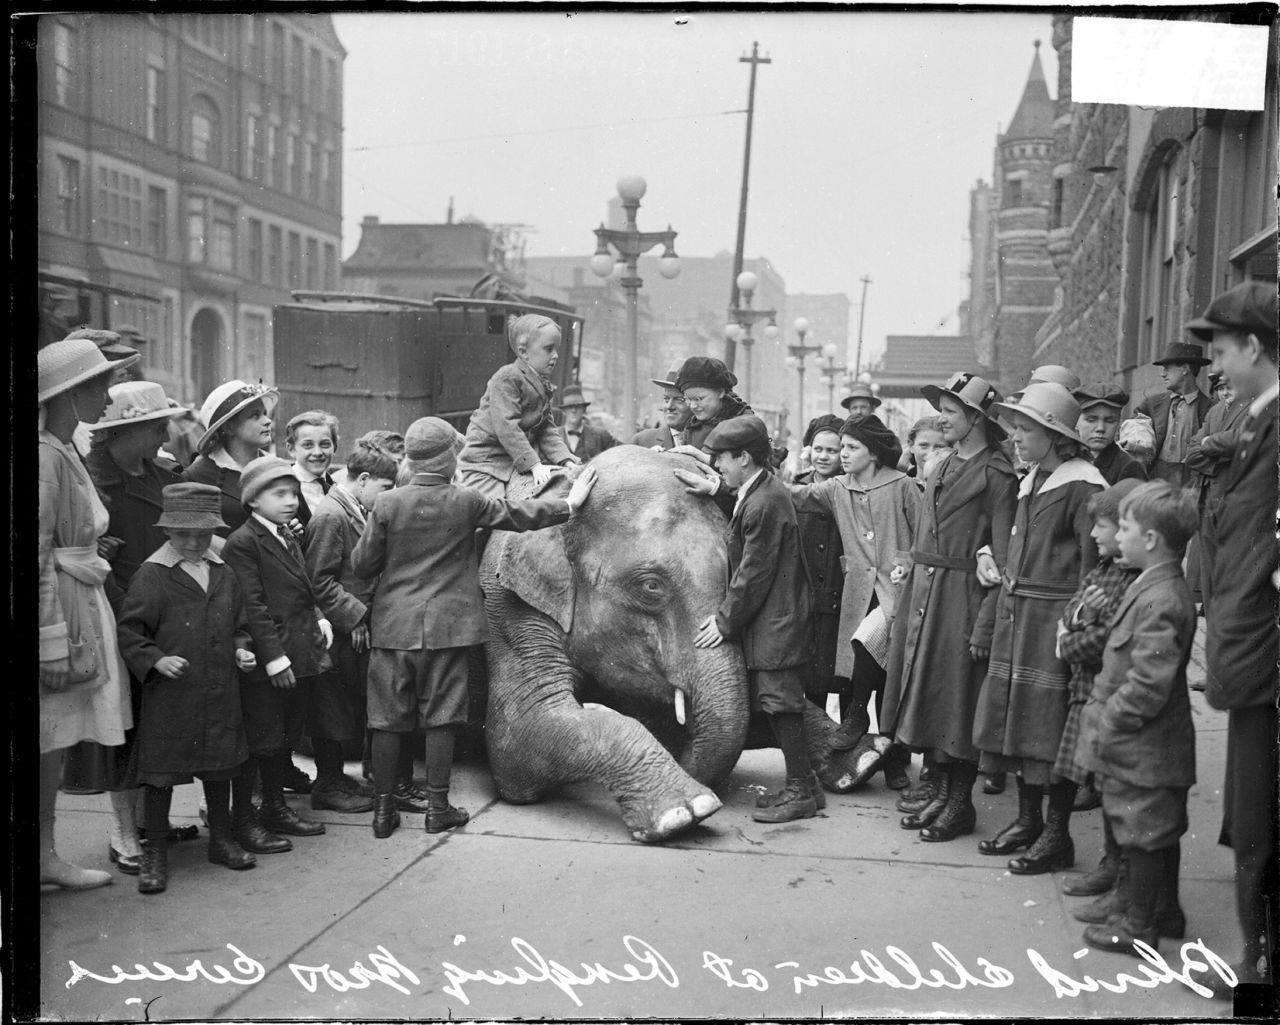 A blind child in Chicago sits on the back of a kneeling elephant from the Ringling Brothers Circus in April 1917. Ringling Bros. will have elephants perform for the final time Sunday, May 1. It had previously said <a href="http://money.cnn.com/2015/03/05/news/ringling-bros-circus-elephants/index.html" target="_blank">that all of its elephants would be retired by 2018, </a>but the retirement came early.